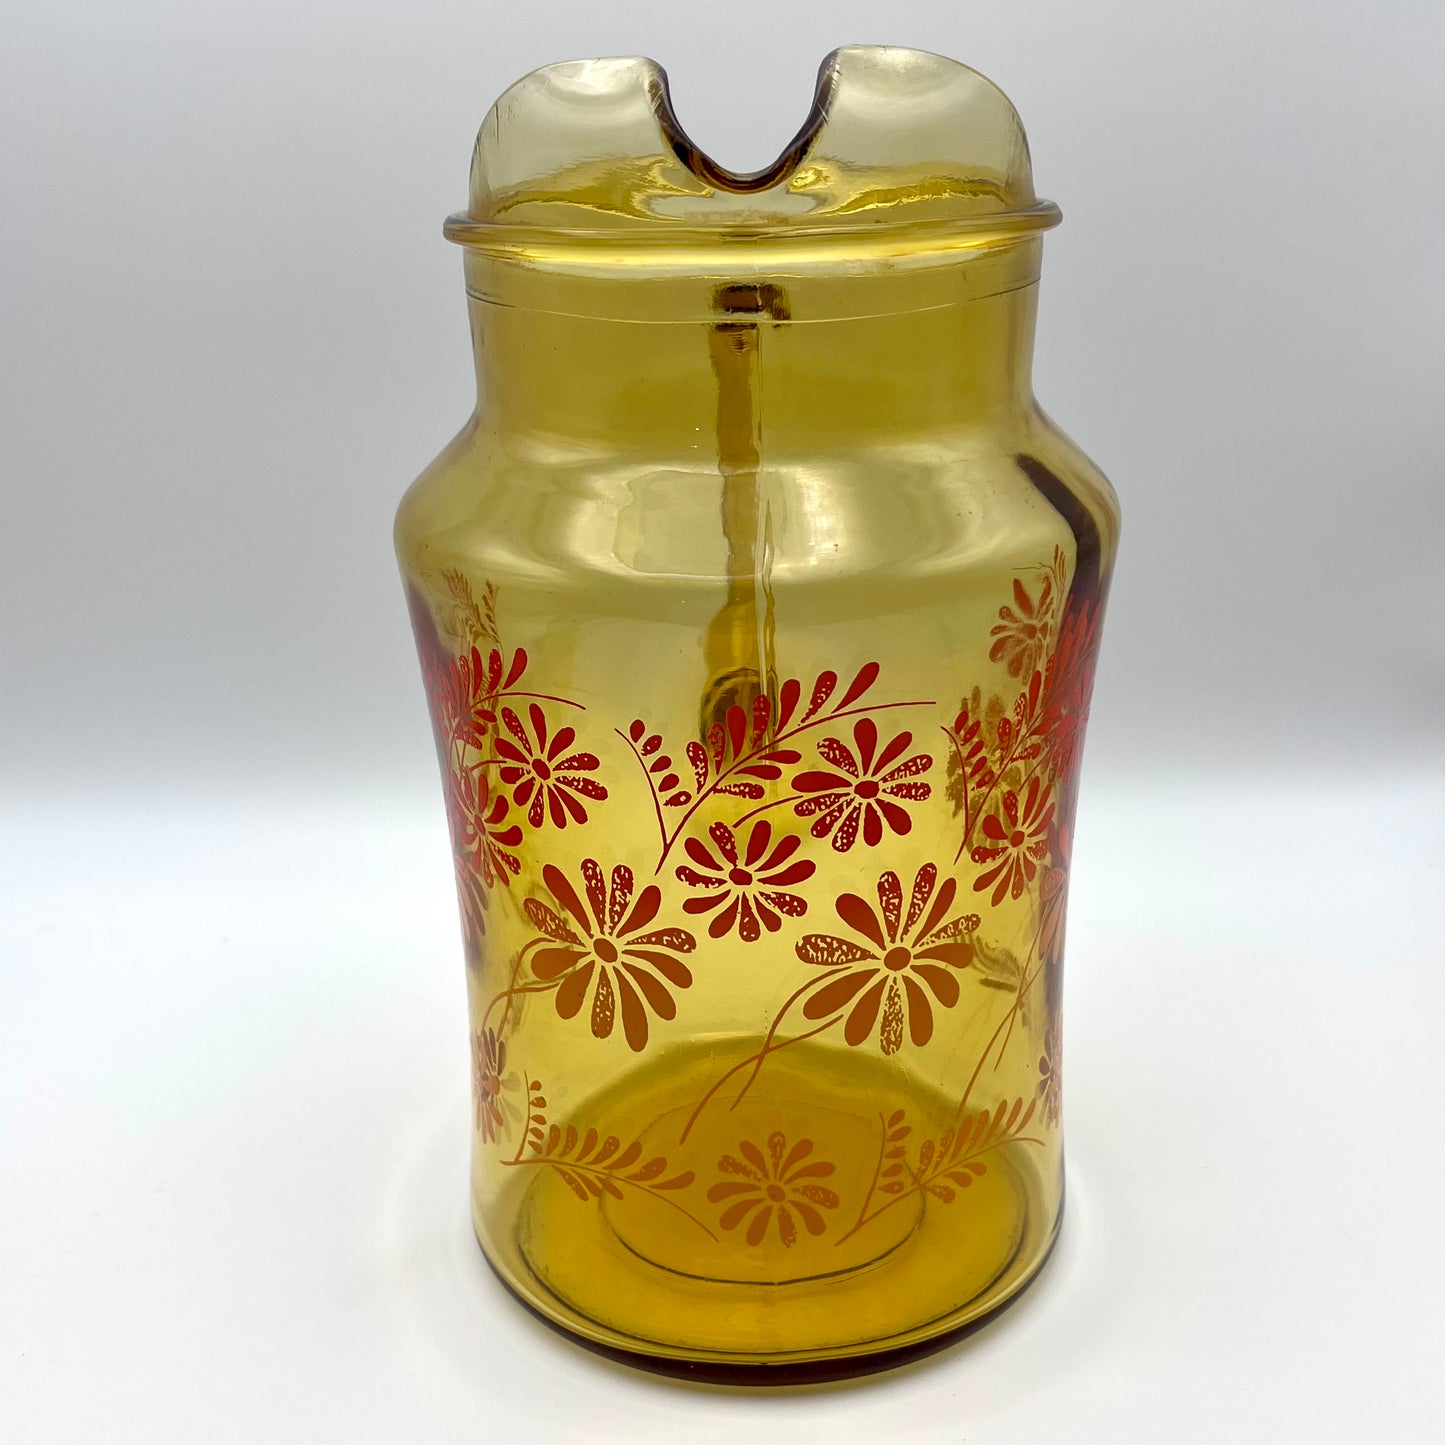 1970s Glass Pitcher with Flower Motif